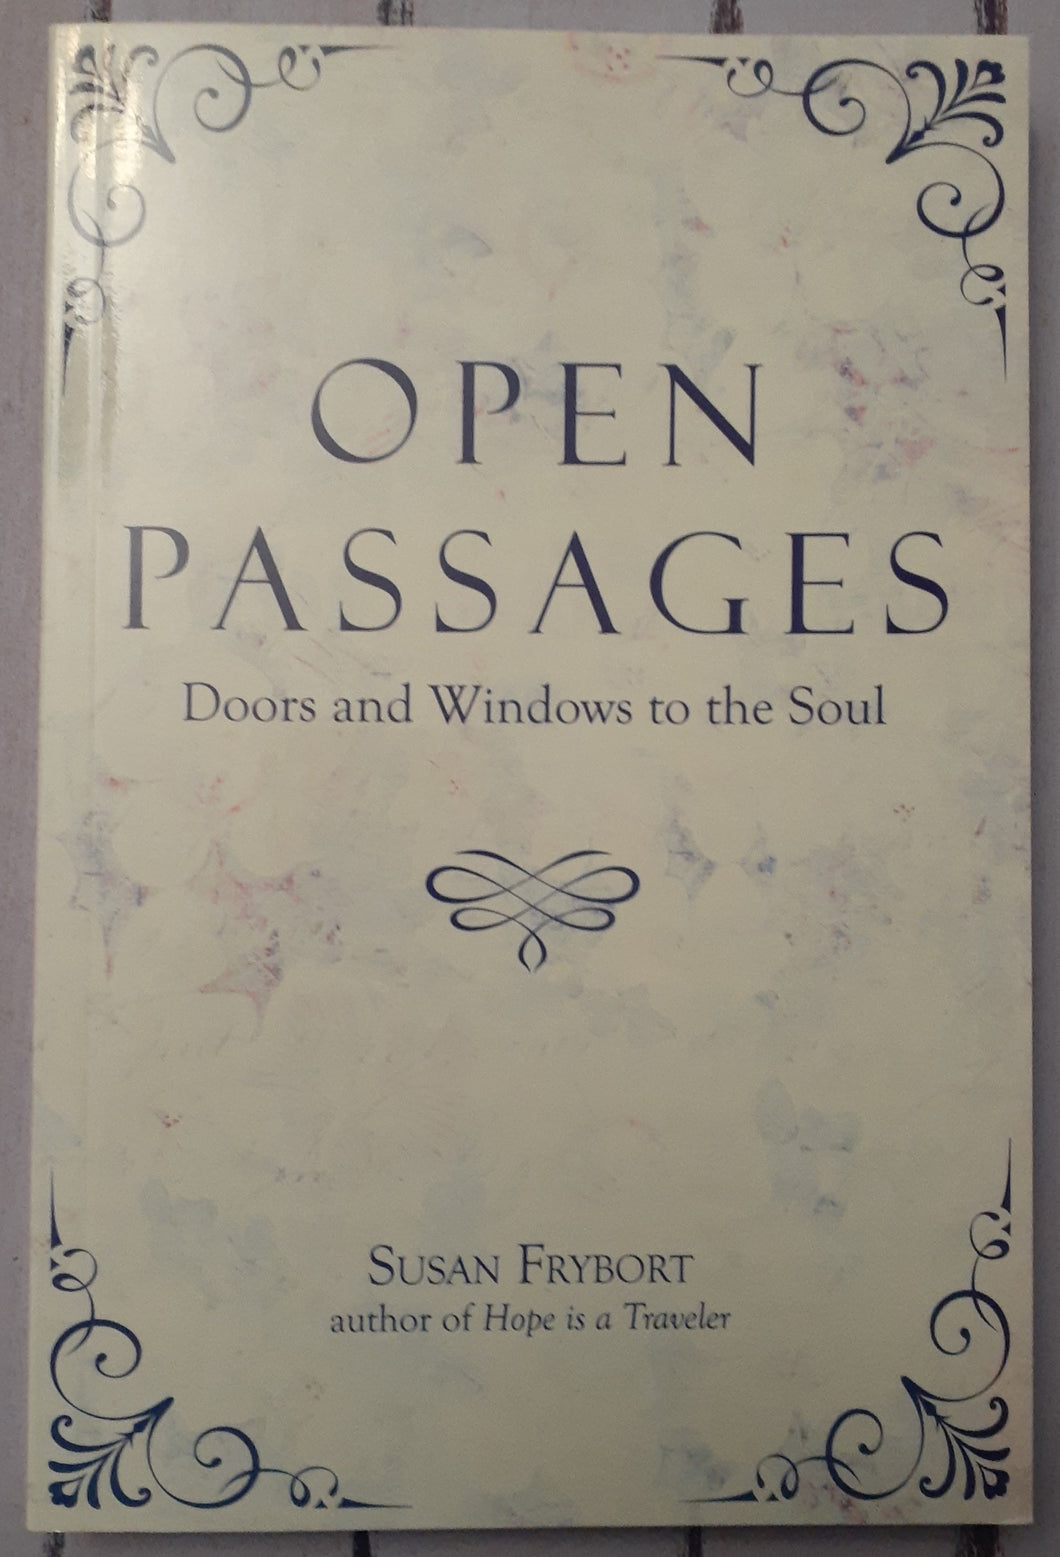 Open Passages - Doors and Windows to the Soul